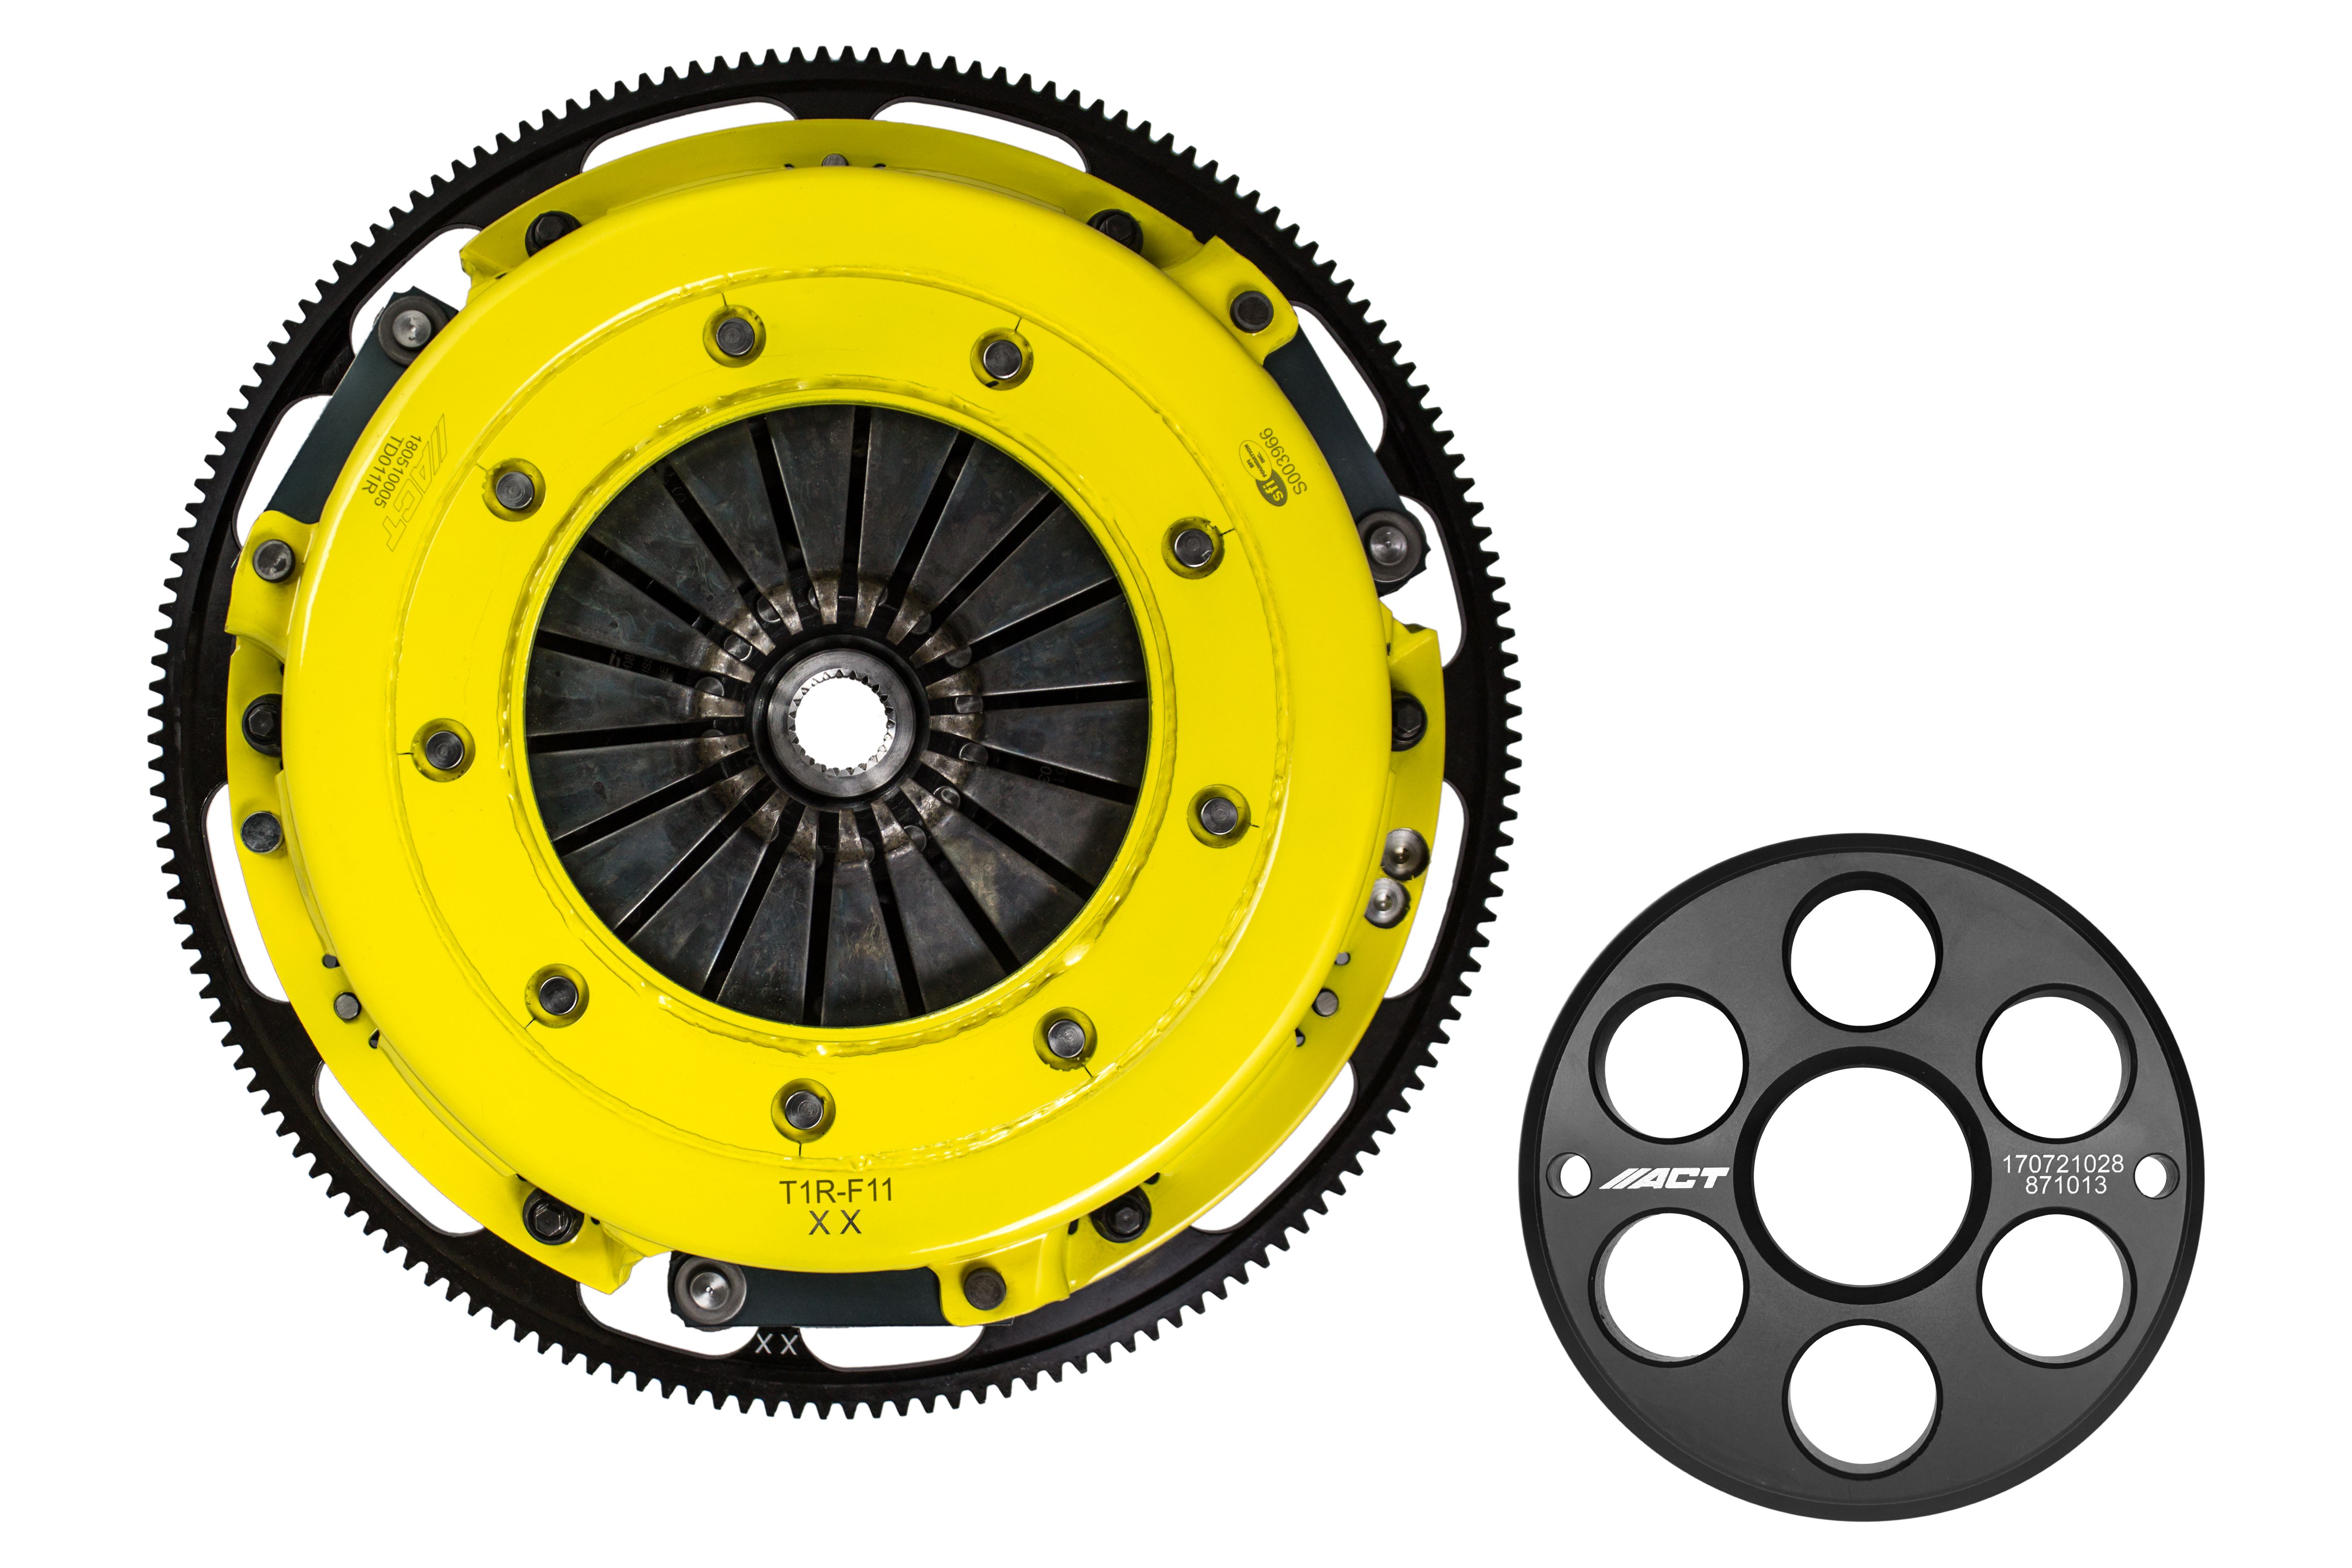 2007-2014 Ford Mustang ACT Clutch Kit Twin Disc HD Race Kit - T1R-F11 - Advanced Clutch